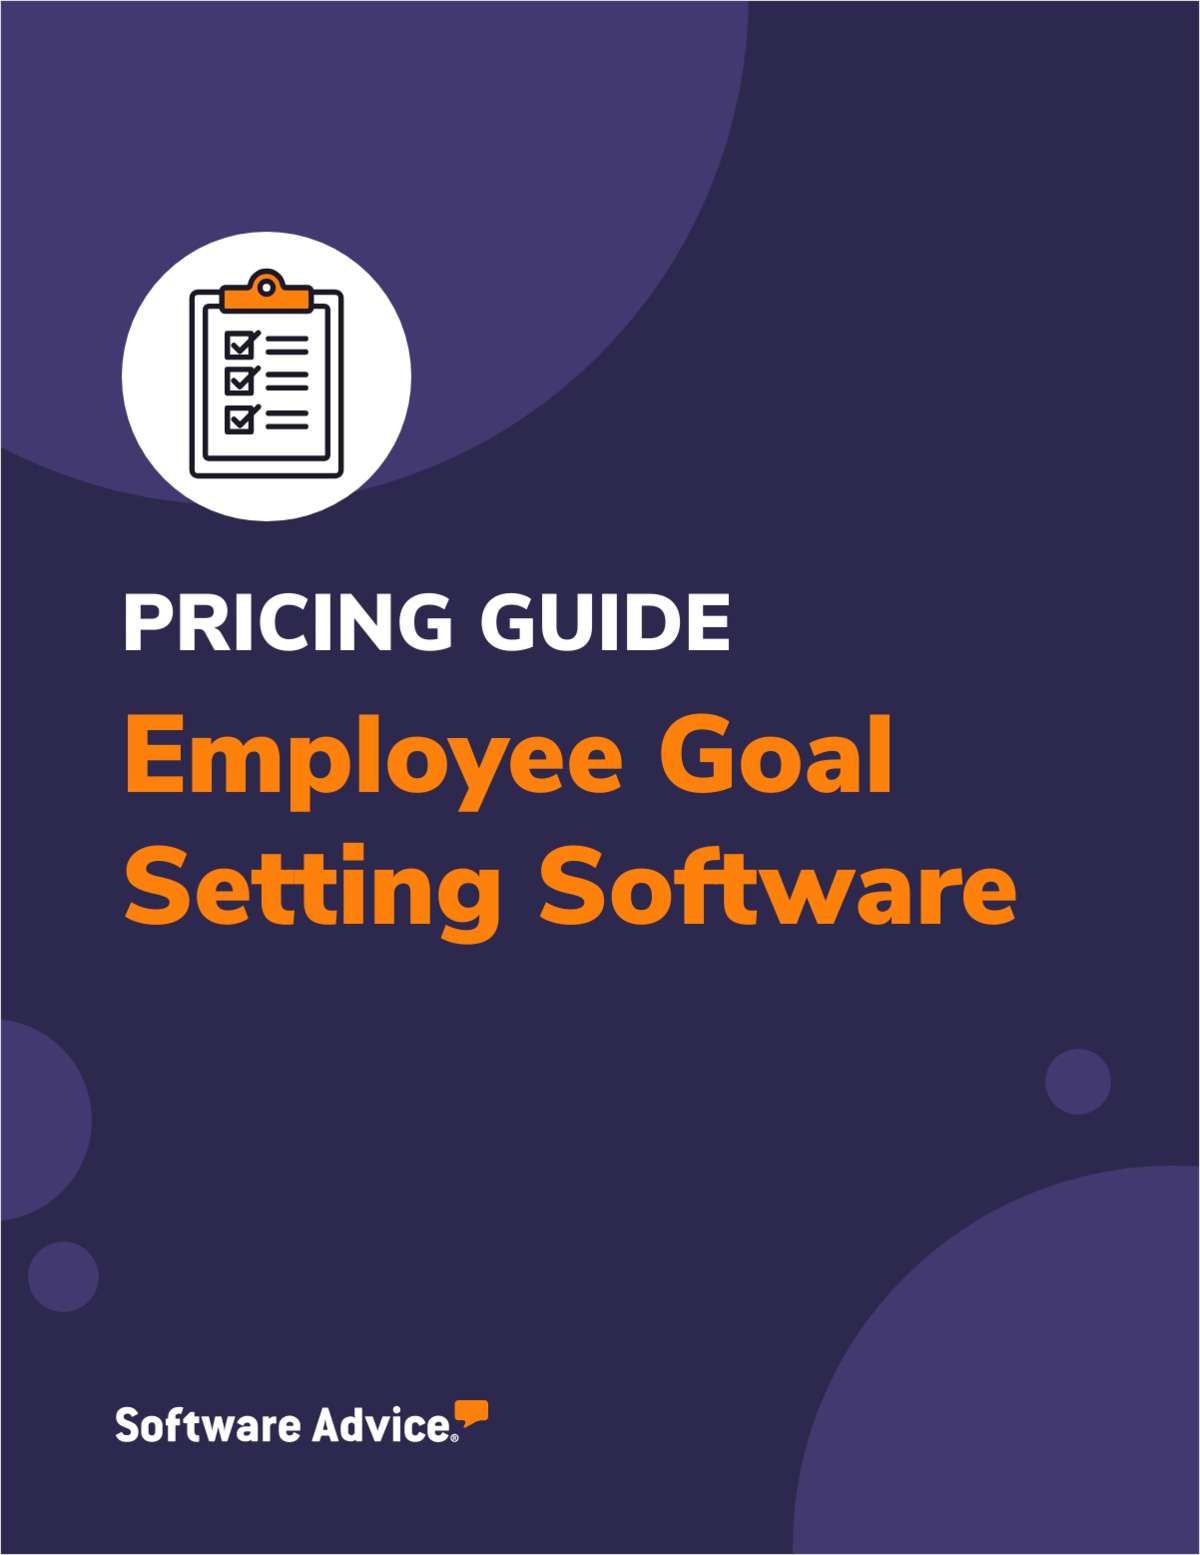 Employee Goal Setting Software Pricing Guide